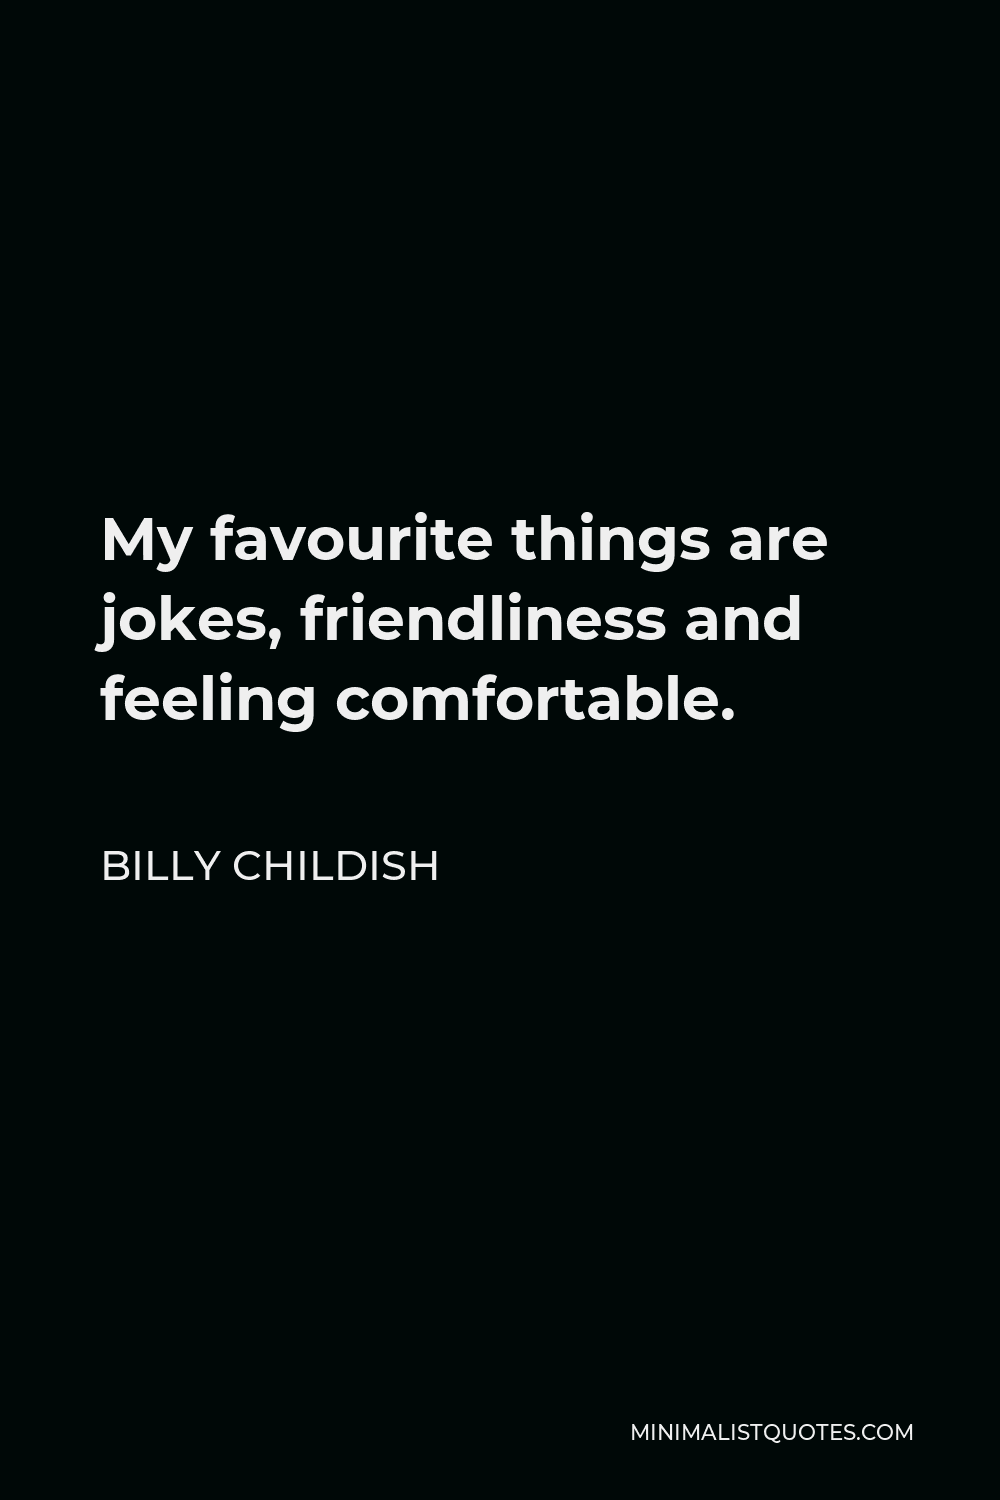 Billy Childish Quote - My favourite things are jokes, friendliness and feeling comfortable.